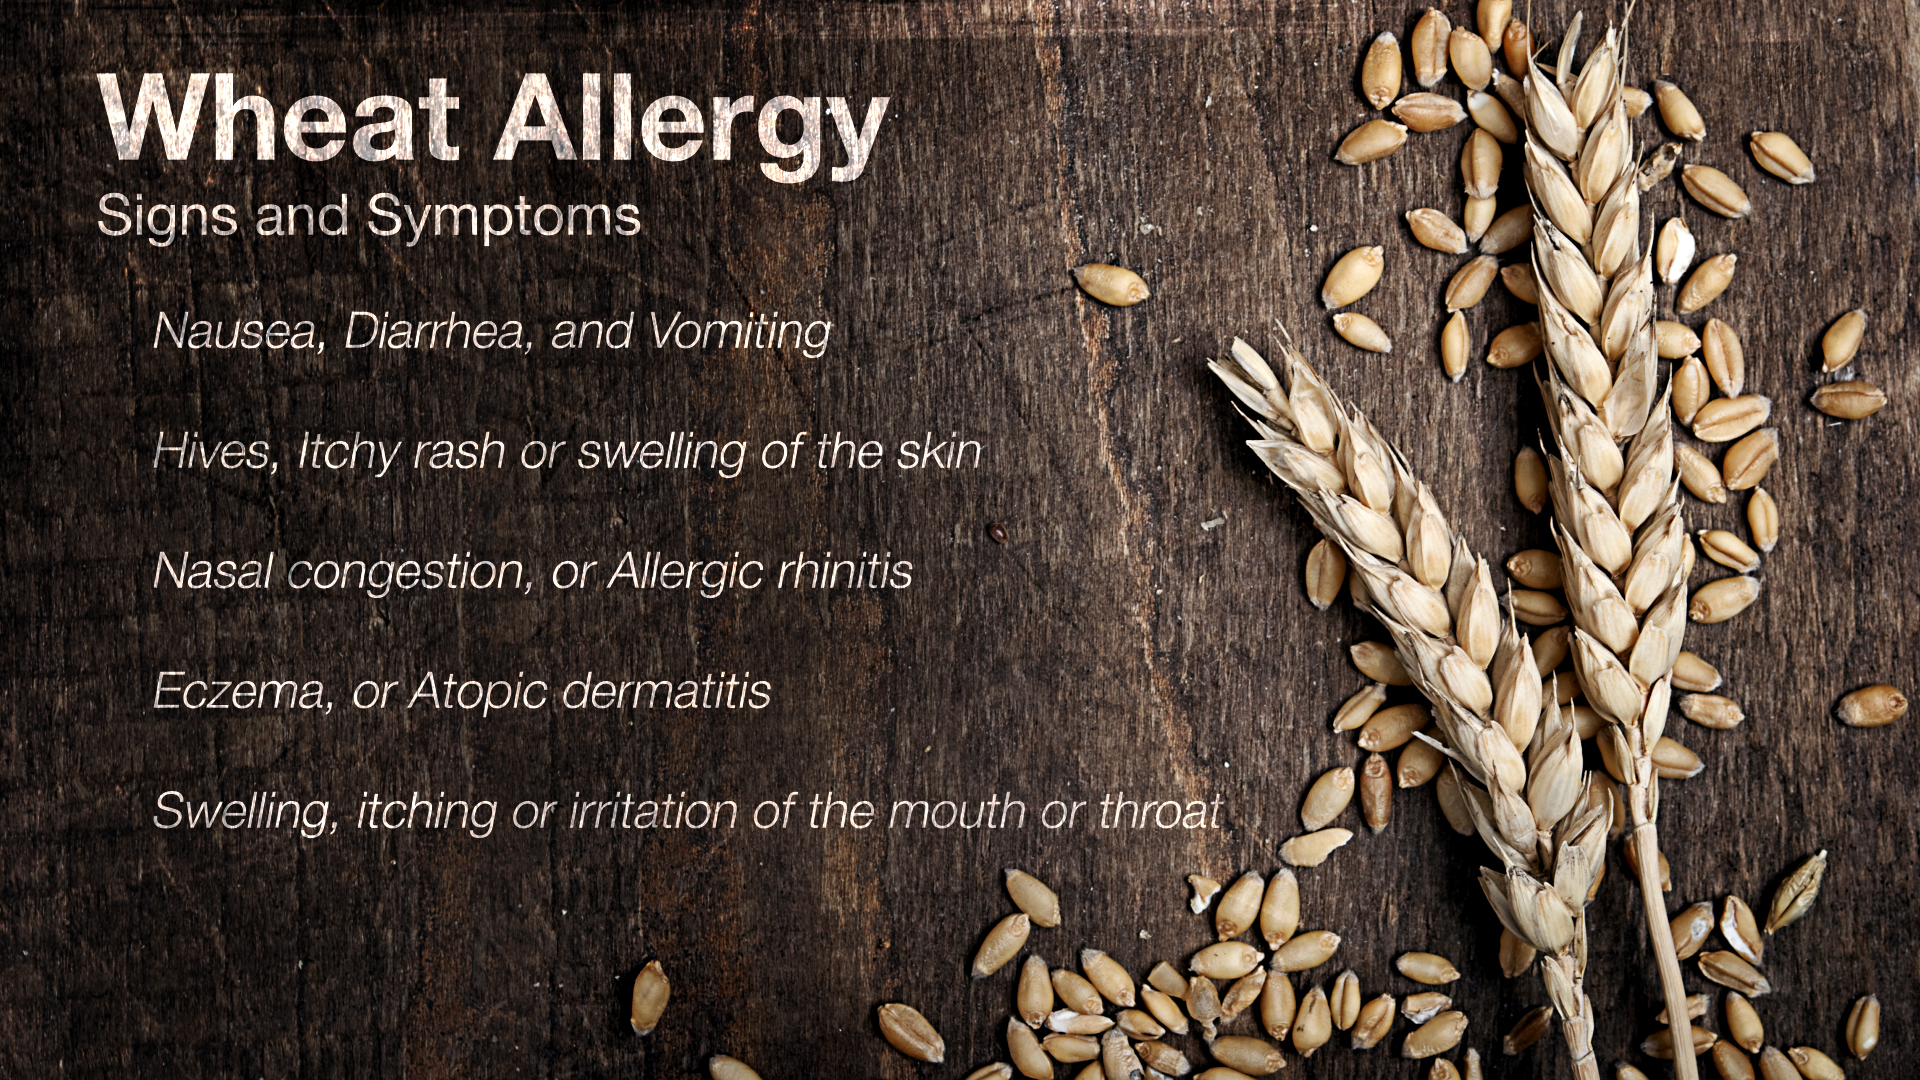 Allergic to wheat symptoms and treatment